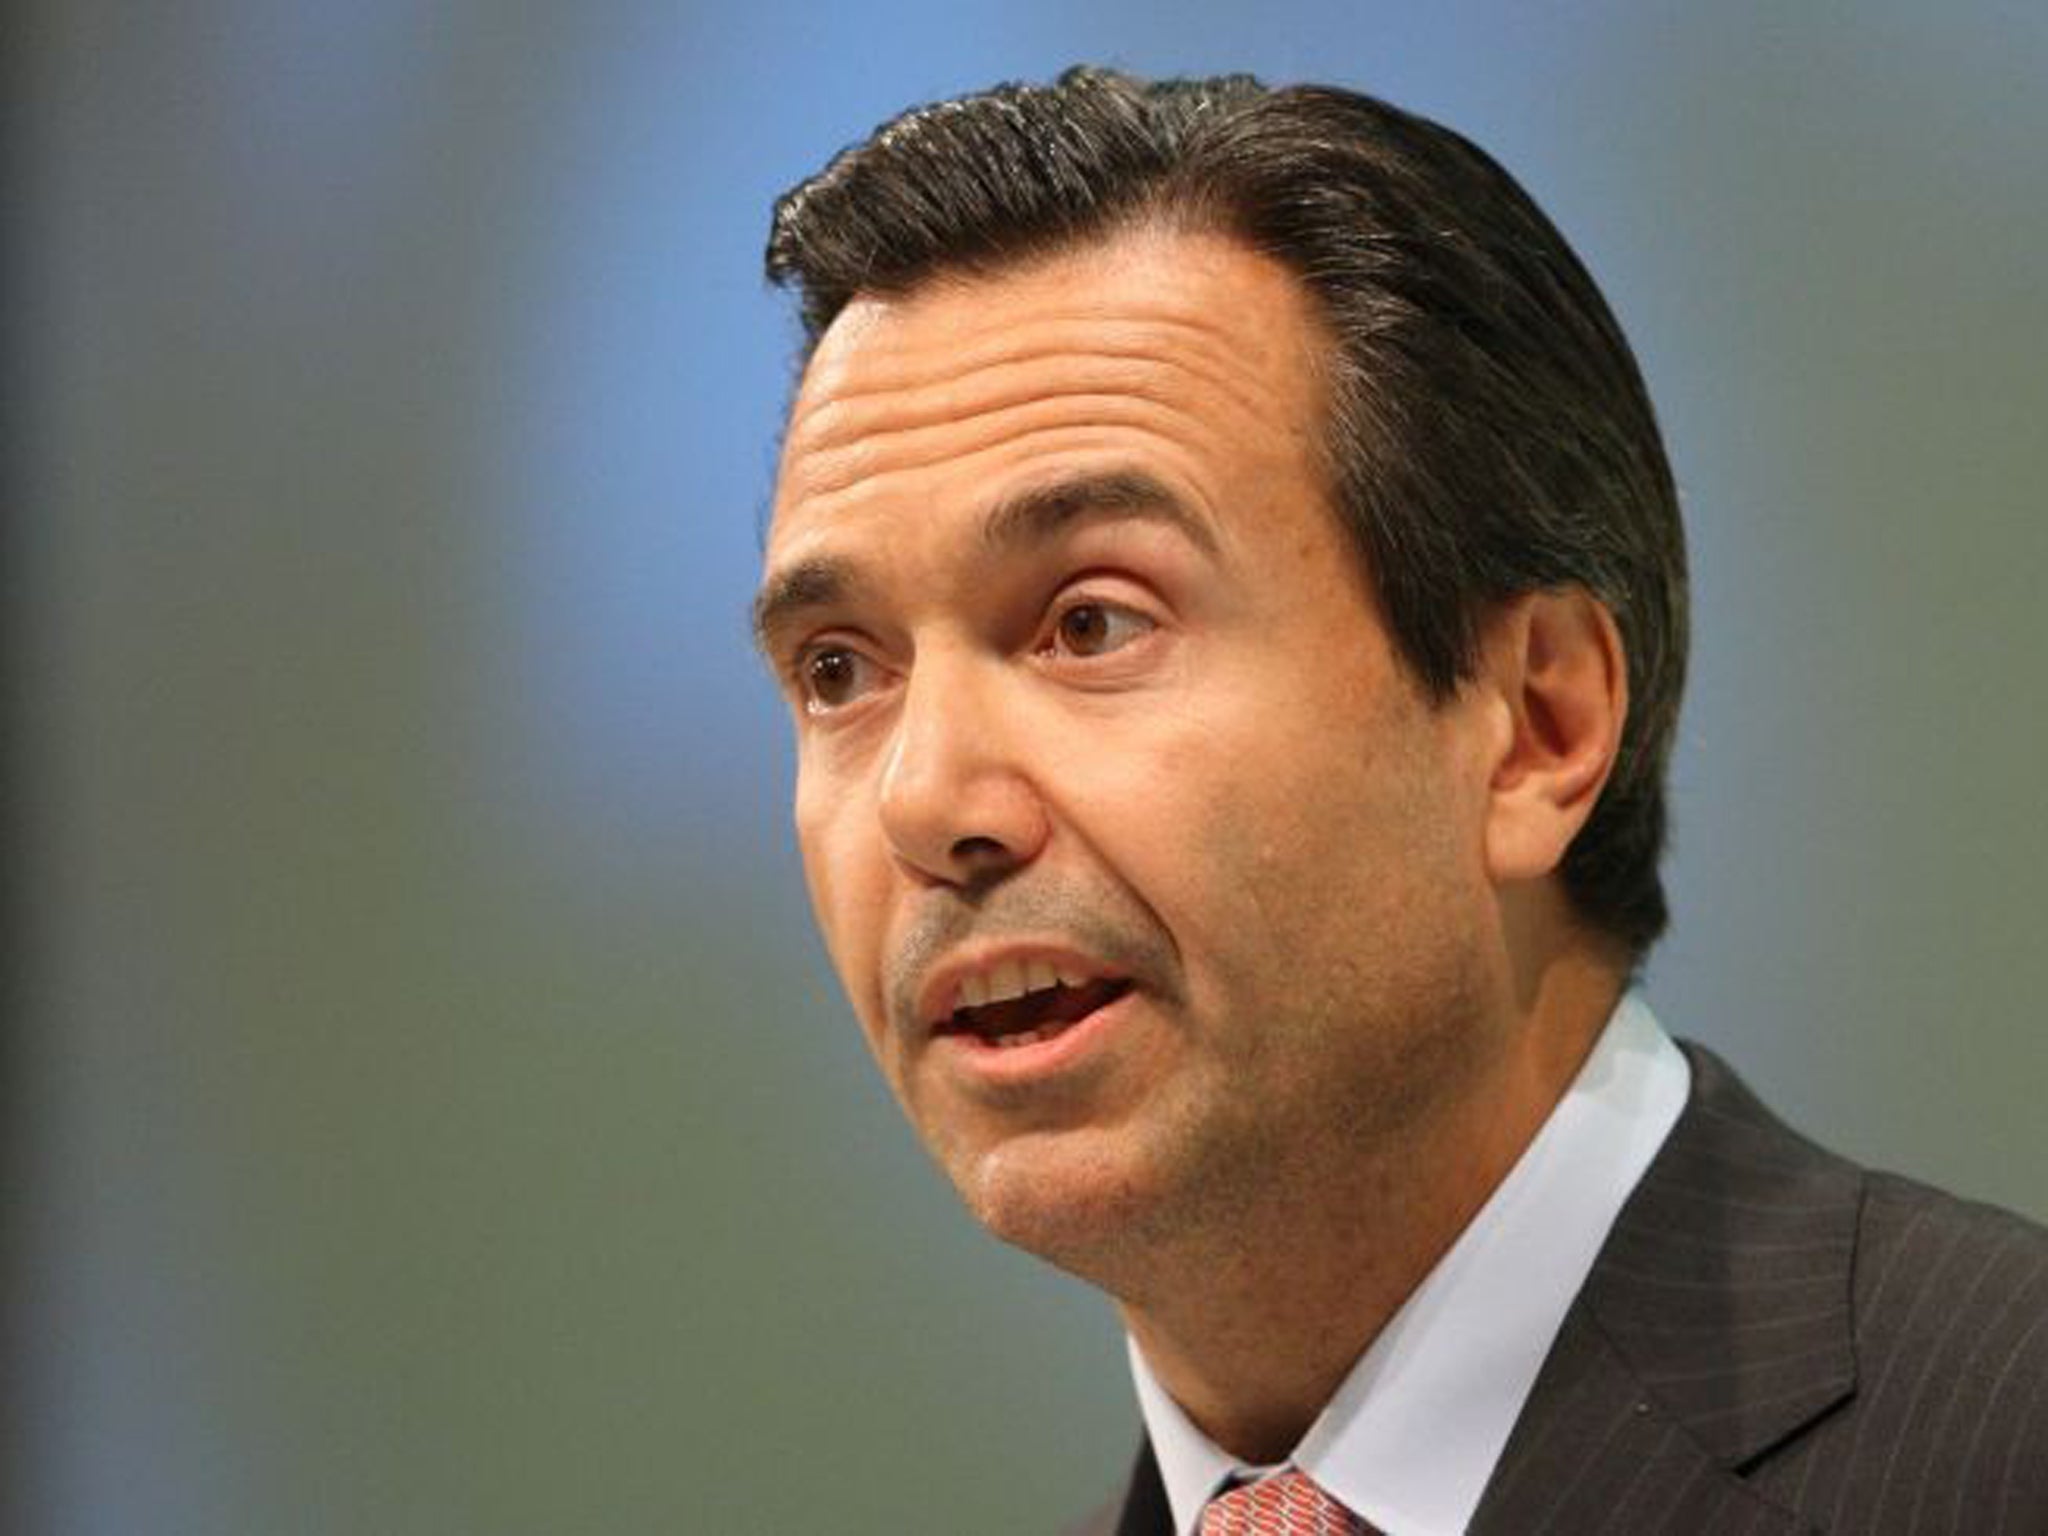 Antonio Horta-Osorio contends that Lloyds is not too mighty and its bonus culture makes sense